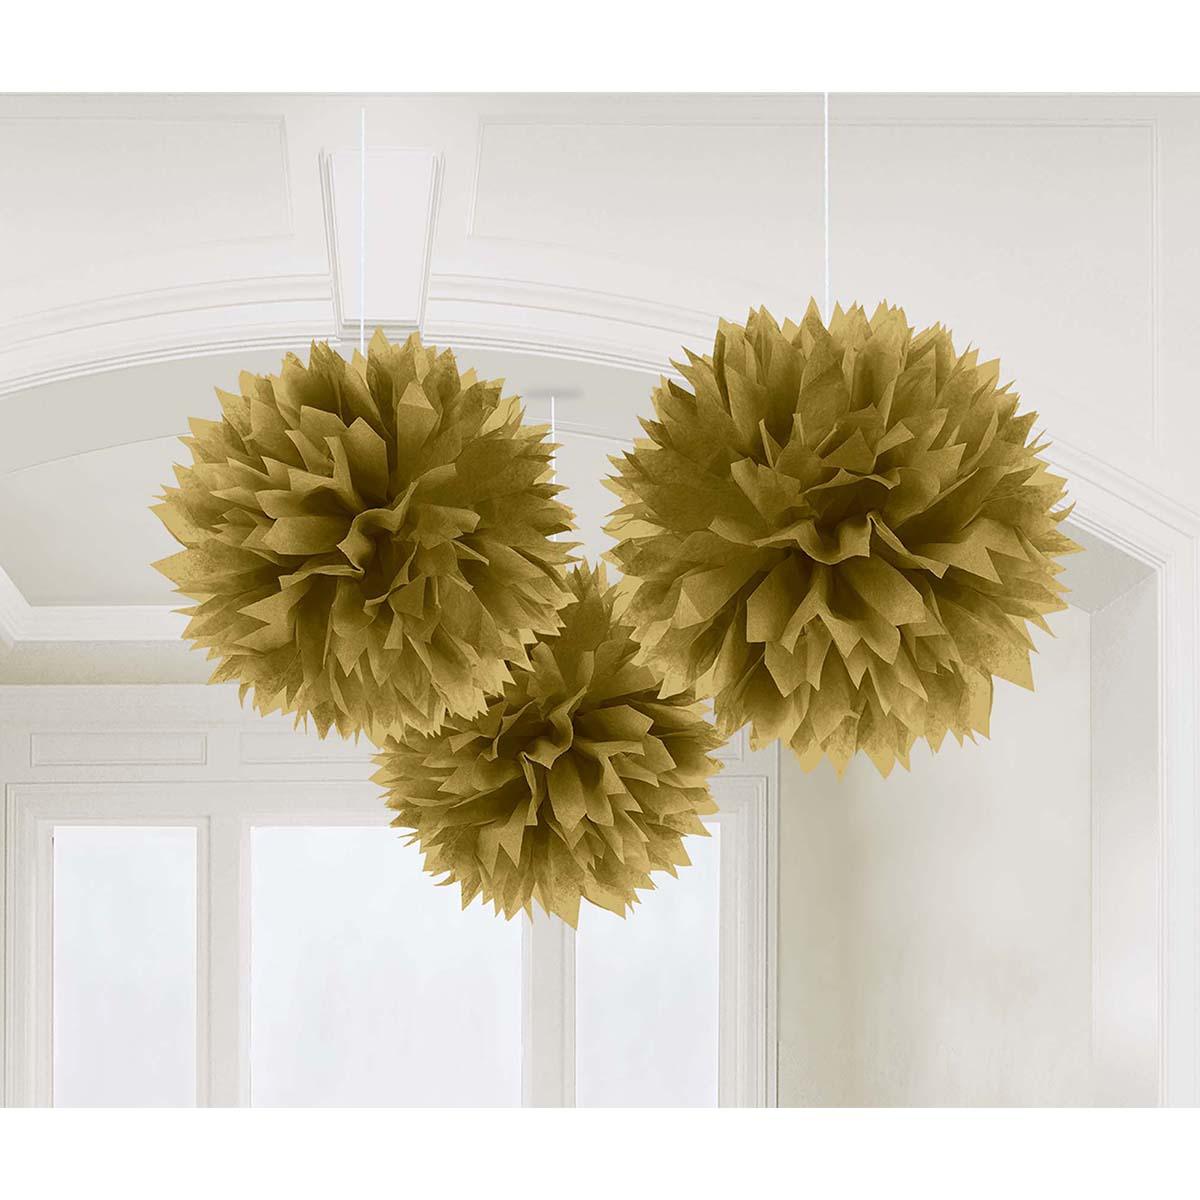 Buy Decorations Fluffy Decorations - Gold 3/pkg. sold at Party Expert